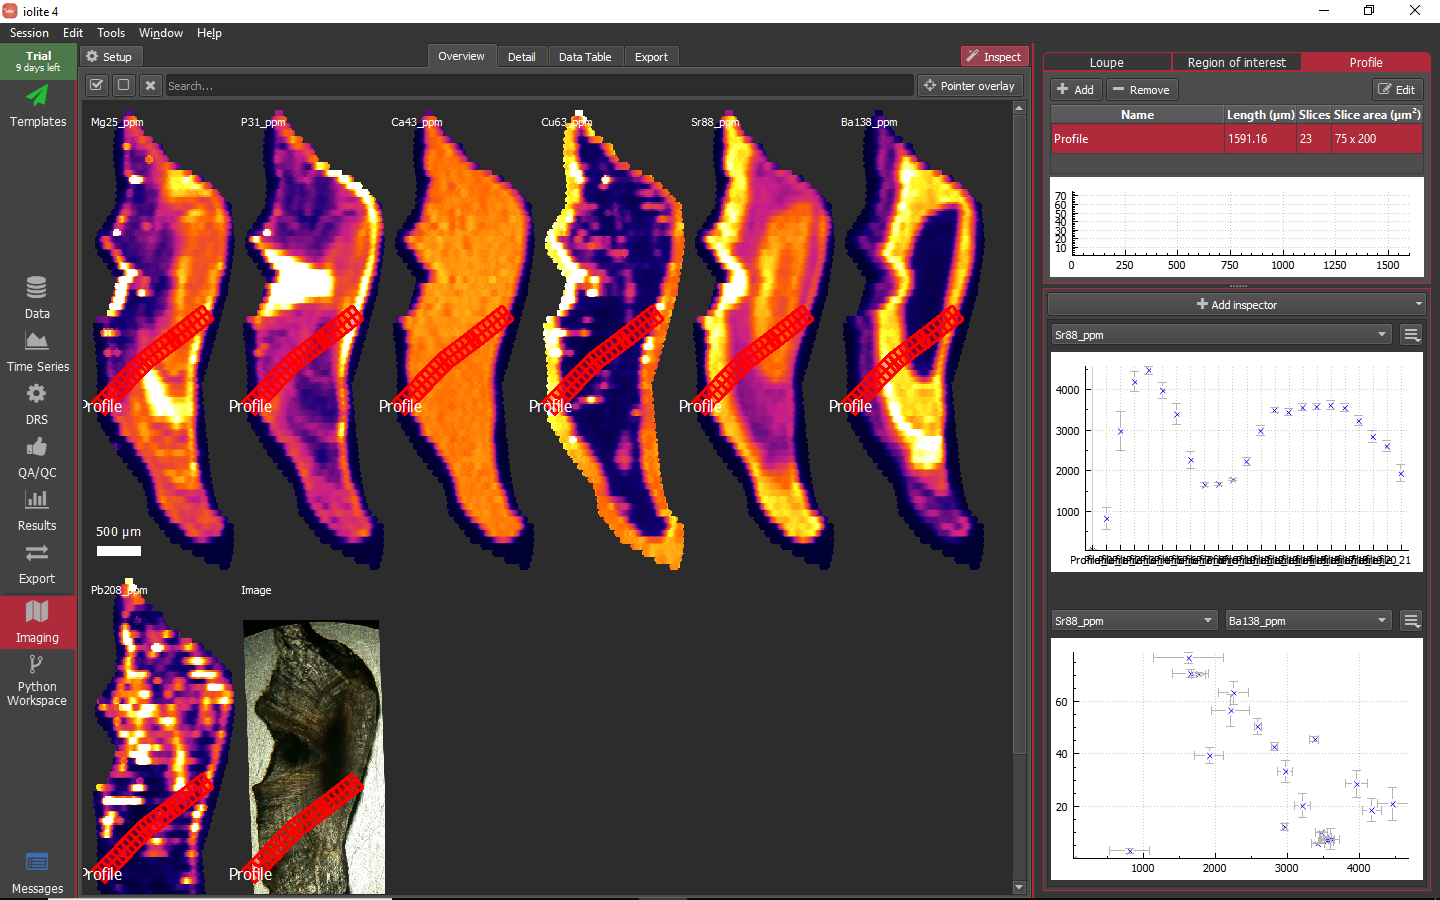 iolite guided examples imaging inspect profile